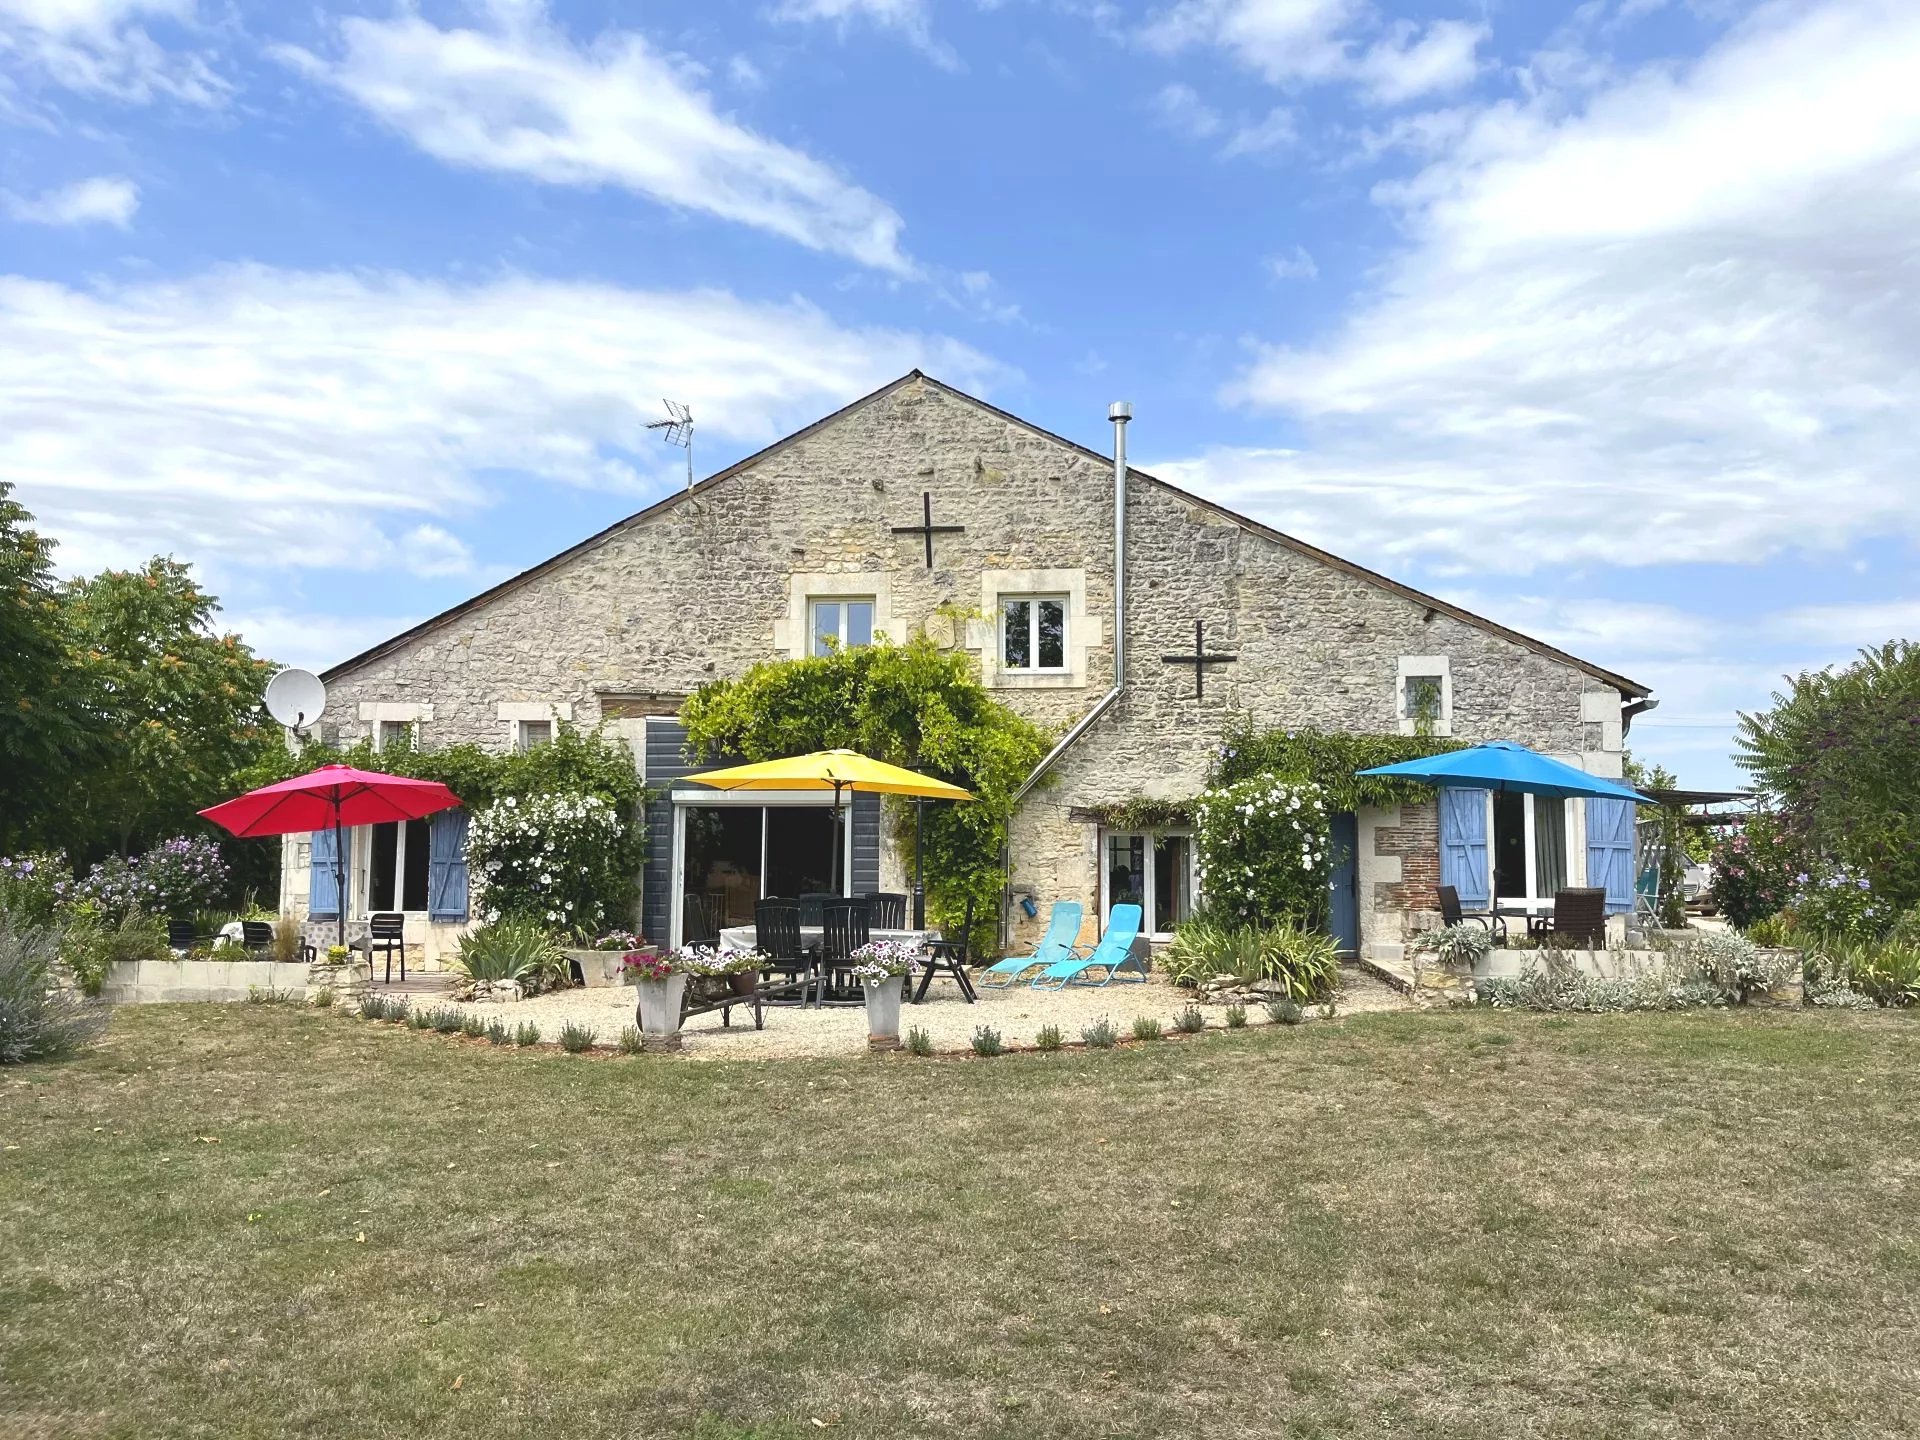 Lovely house and 2 comfortable gites close to Verteuil